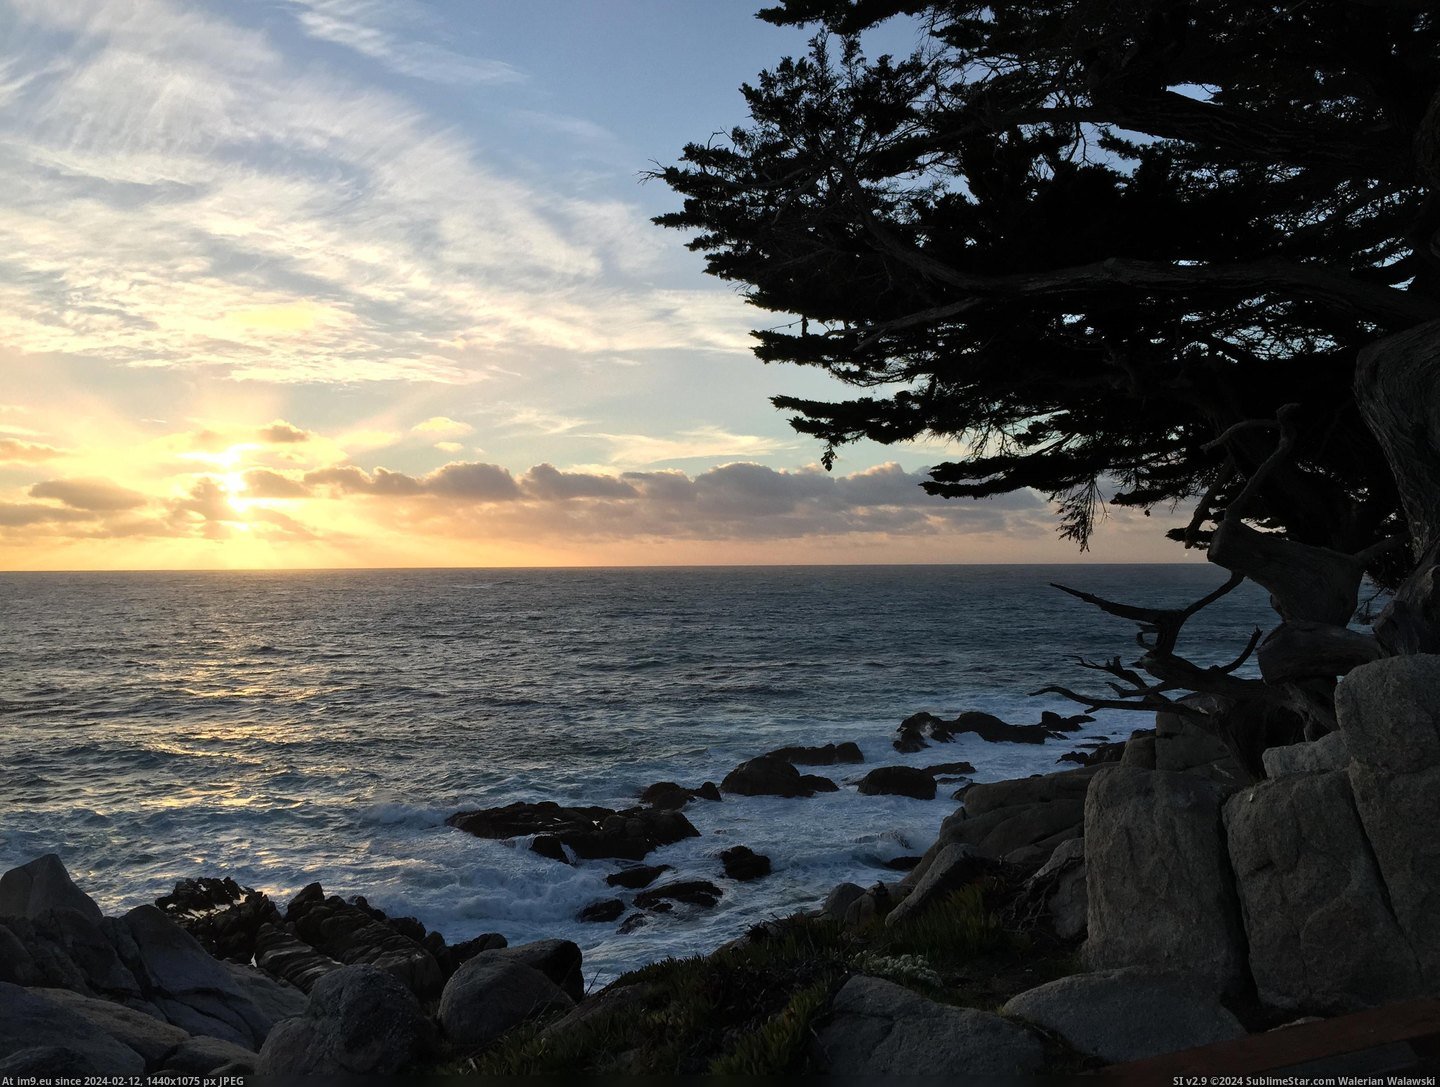 #Sunset #3264x2448 #Cypress #Drive #Mile [Earthporn] Cypress Sunset - 17 Mile Drive, CA 2015 [3264x2448] Pic. (Bild von album My r/EARTHPORN favs))